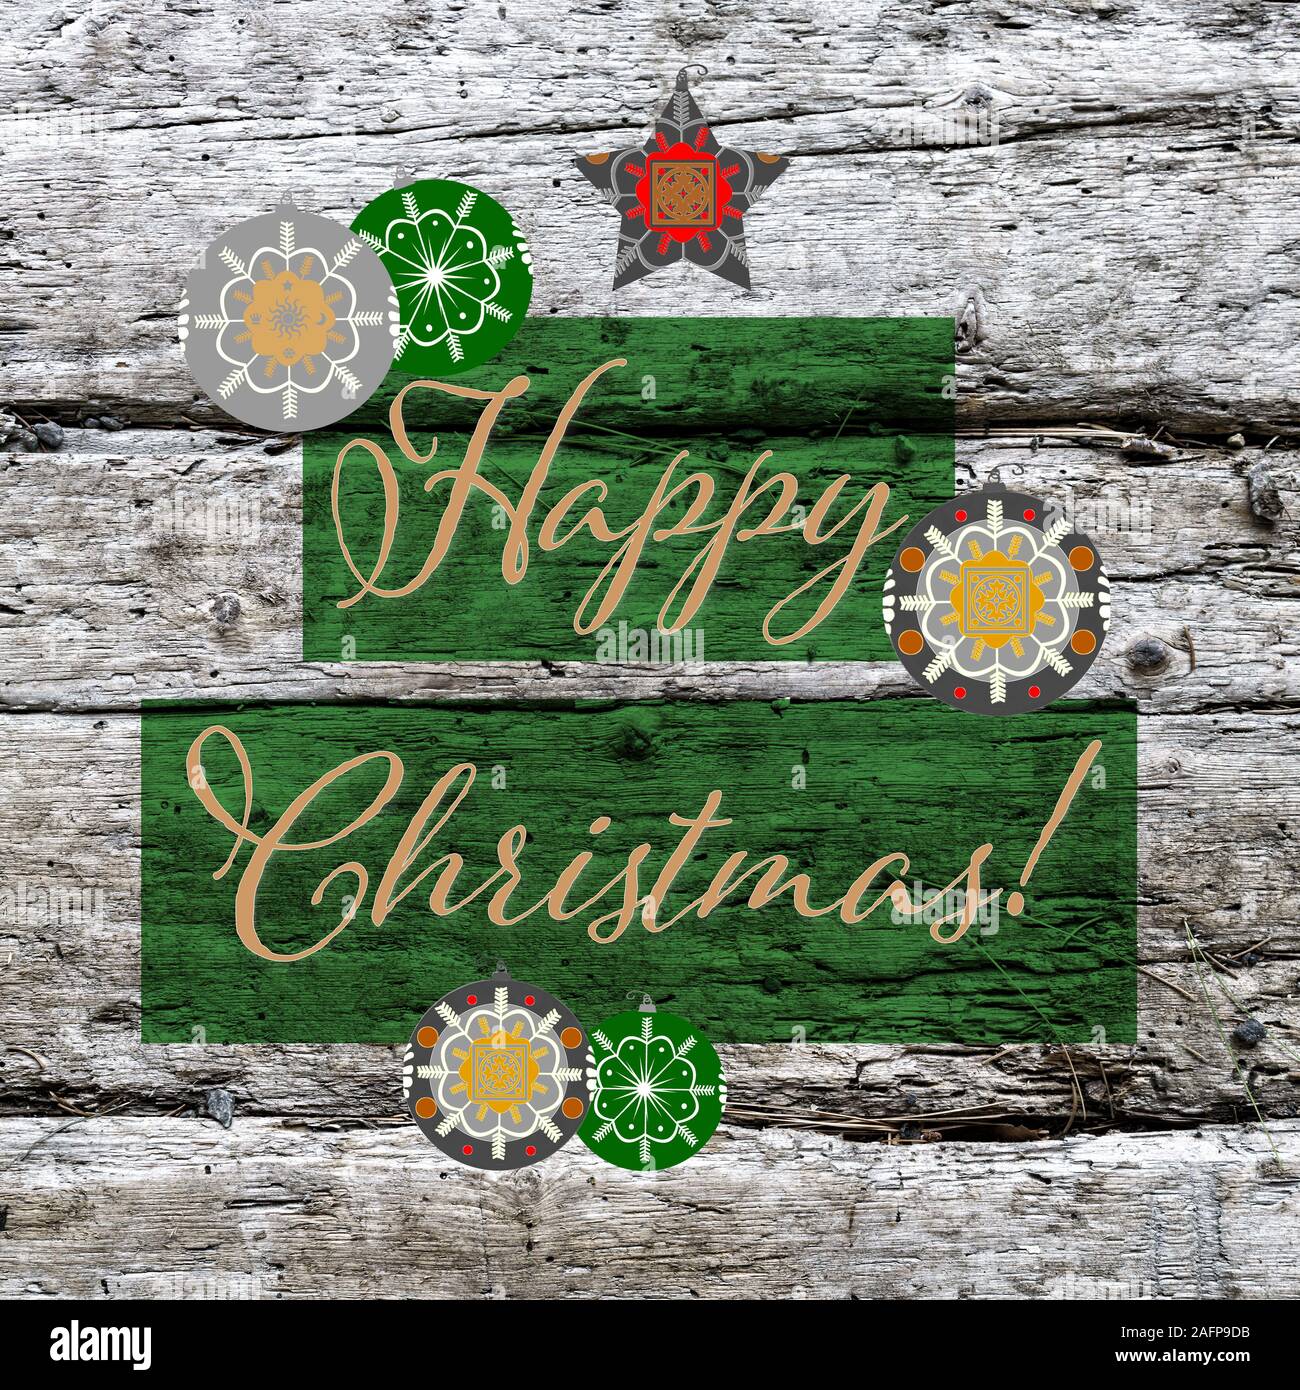 Illustrated holiday ornaments with traditional decorations superimposed on old barn wood wide planks with beautiful patina for bright and cheery happy Stock Photo